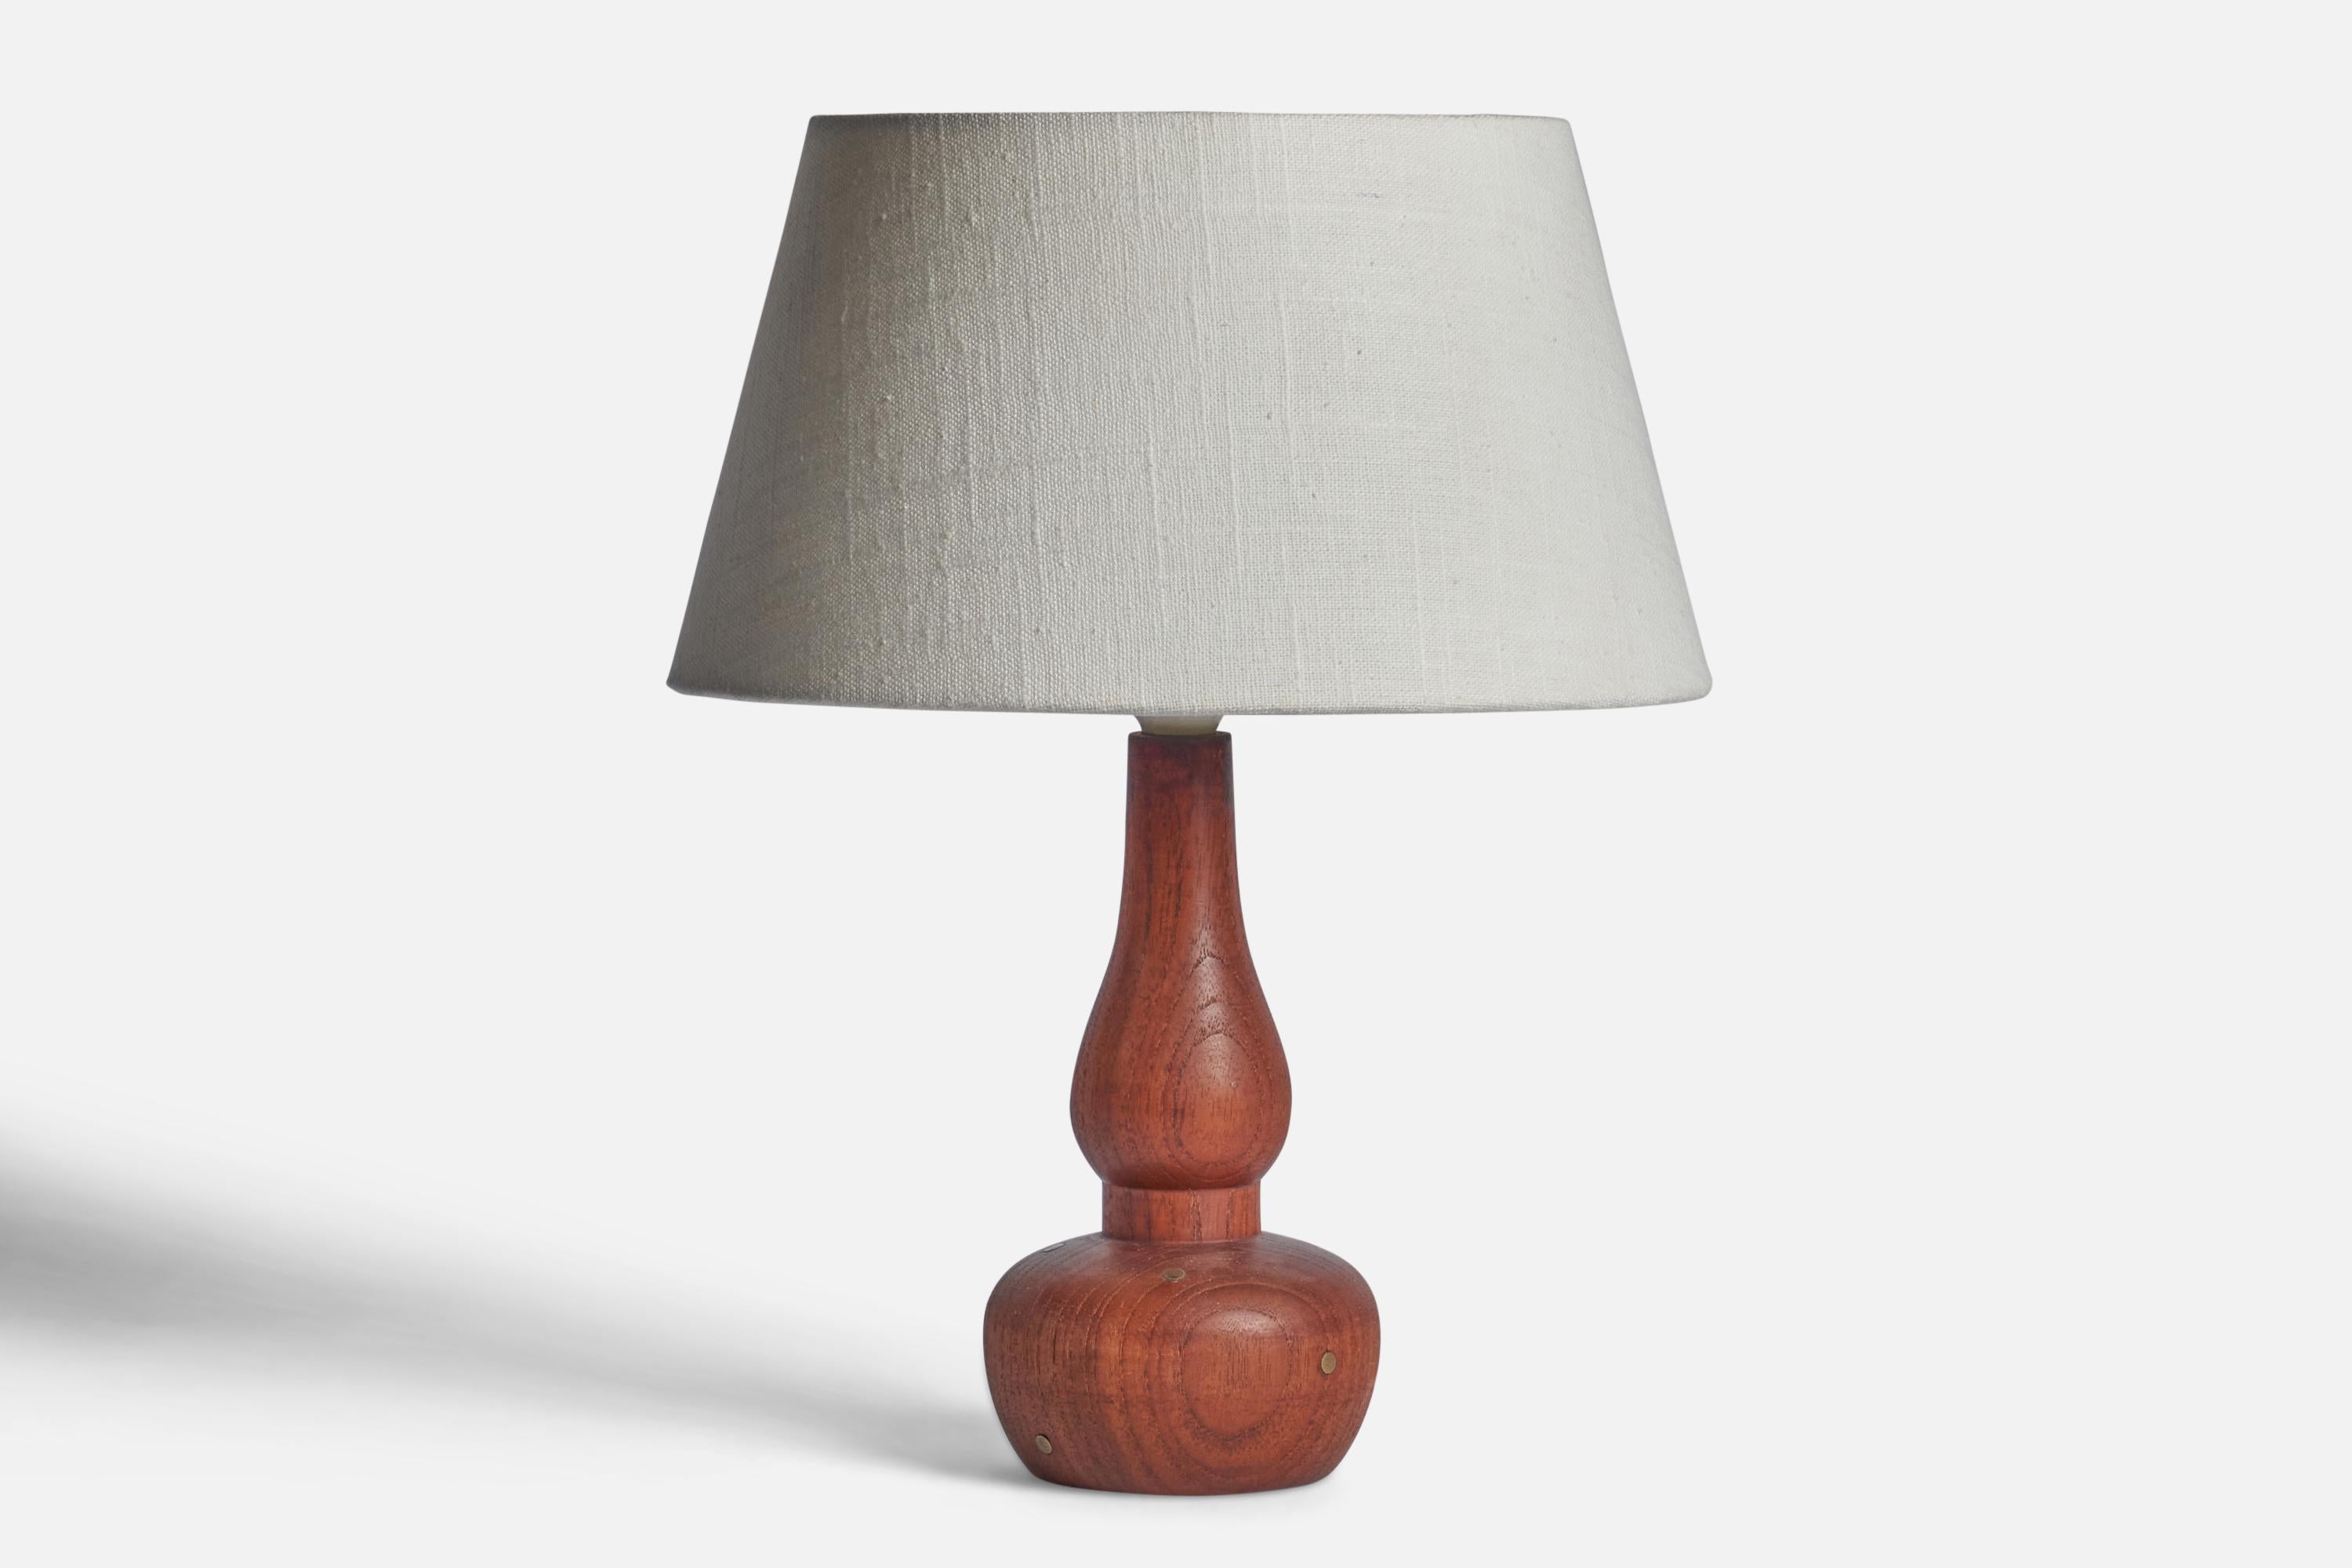 An organic walnut and brass table lamp designed and produced in Denmark, 1950s.

Dimensions of Lamp (inches): 10.35” H x 3.75” Diameter
Dimensions of Shade (inches): 7” Top Diameter x 10” Bottom Diameter x 5.5” H 
Dimensions of Lamp with Shade